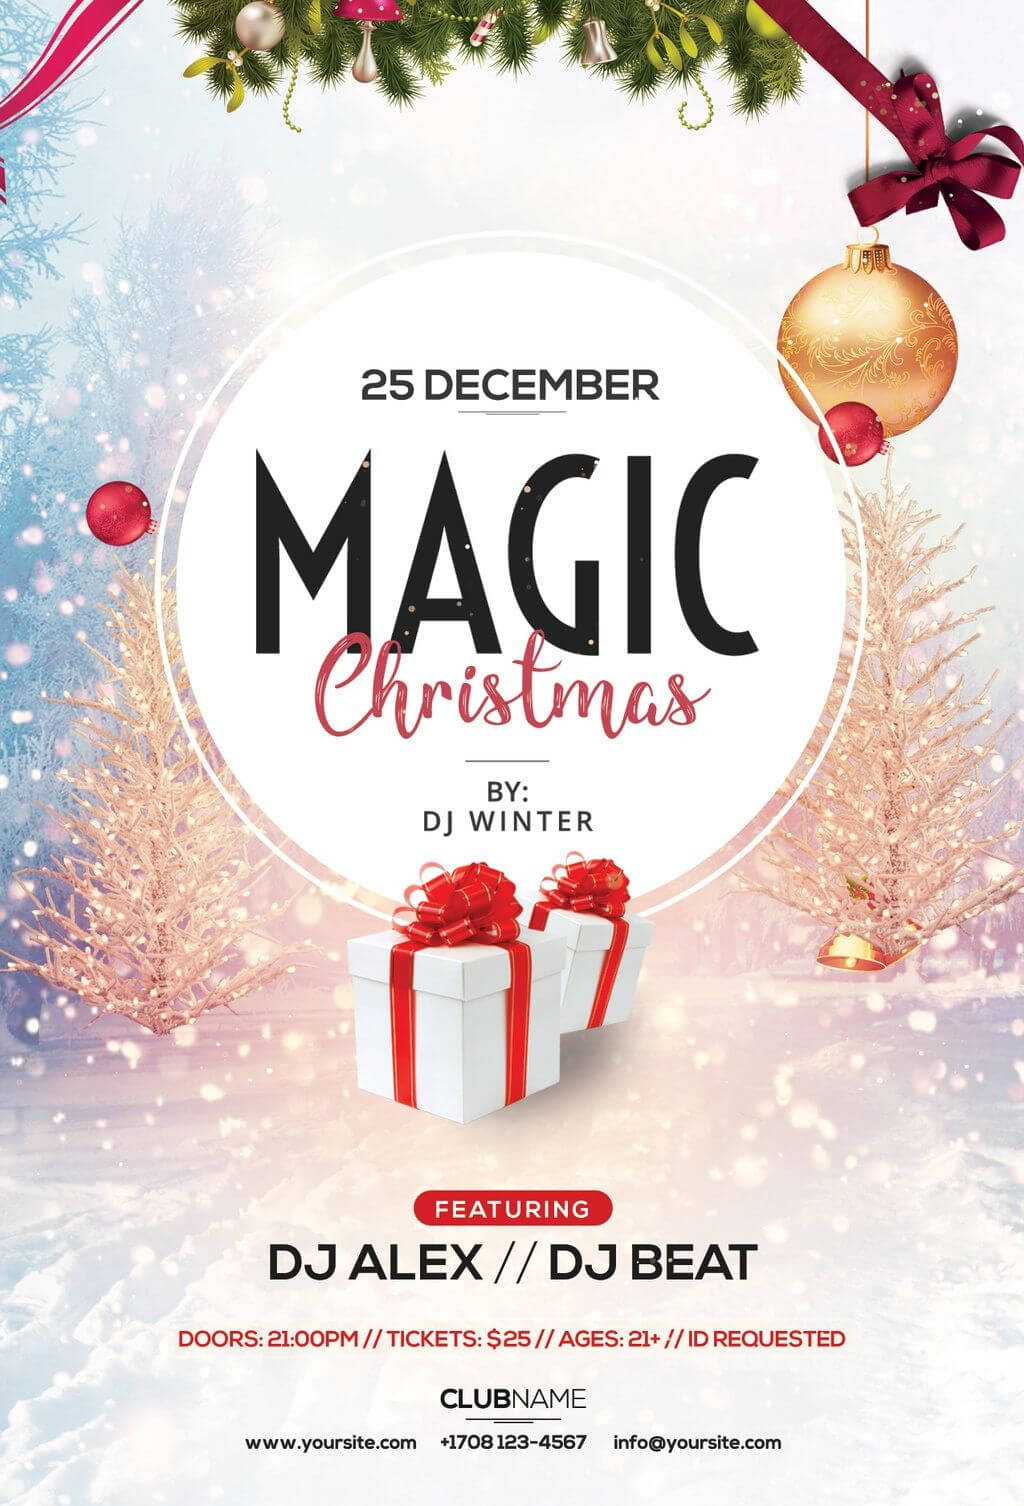 Magic Christmas – Free Psd Flyer Template | Free Psd Flyers Throughout Christmas Brochure Templates Free